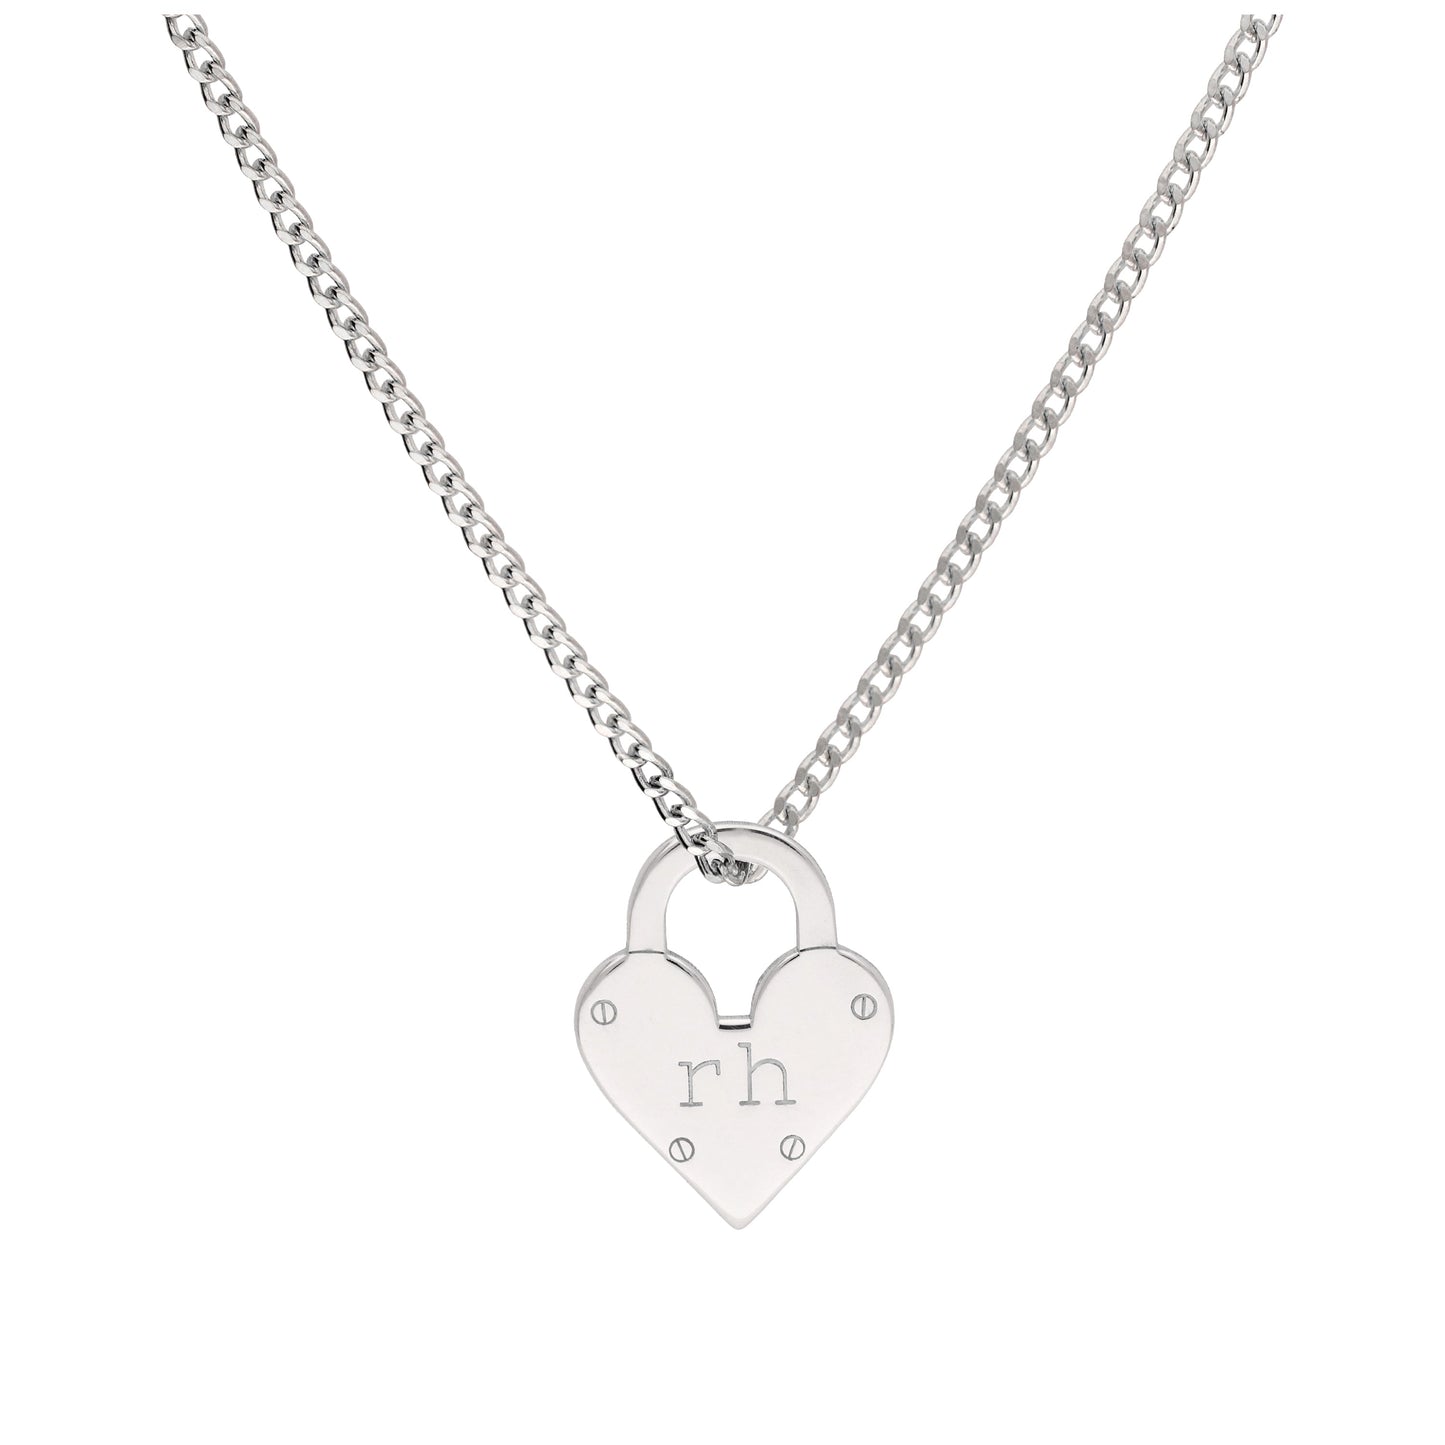 Simple Bespoke Sterling Silver Initials Heart Padlock Necklace 16 - 28 Inches